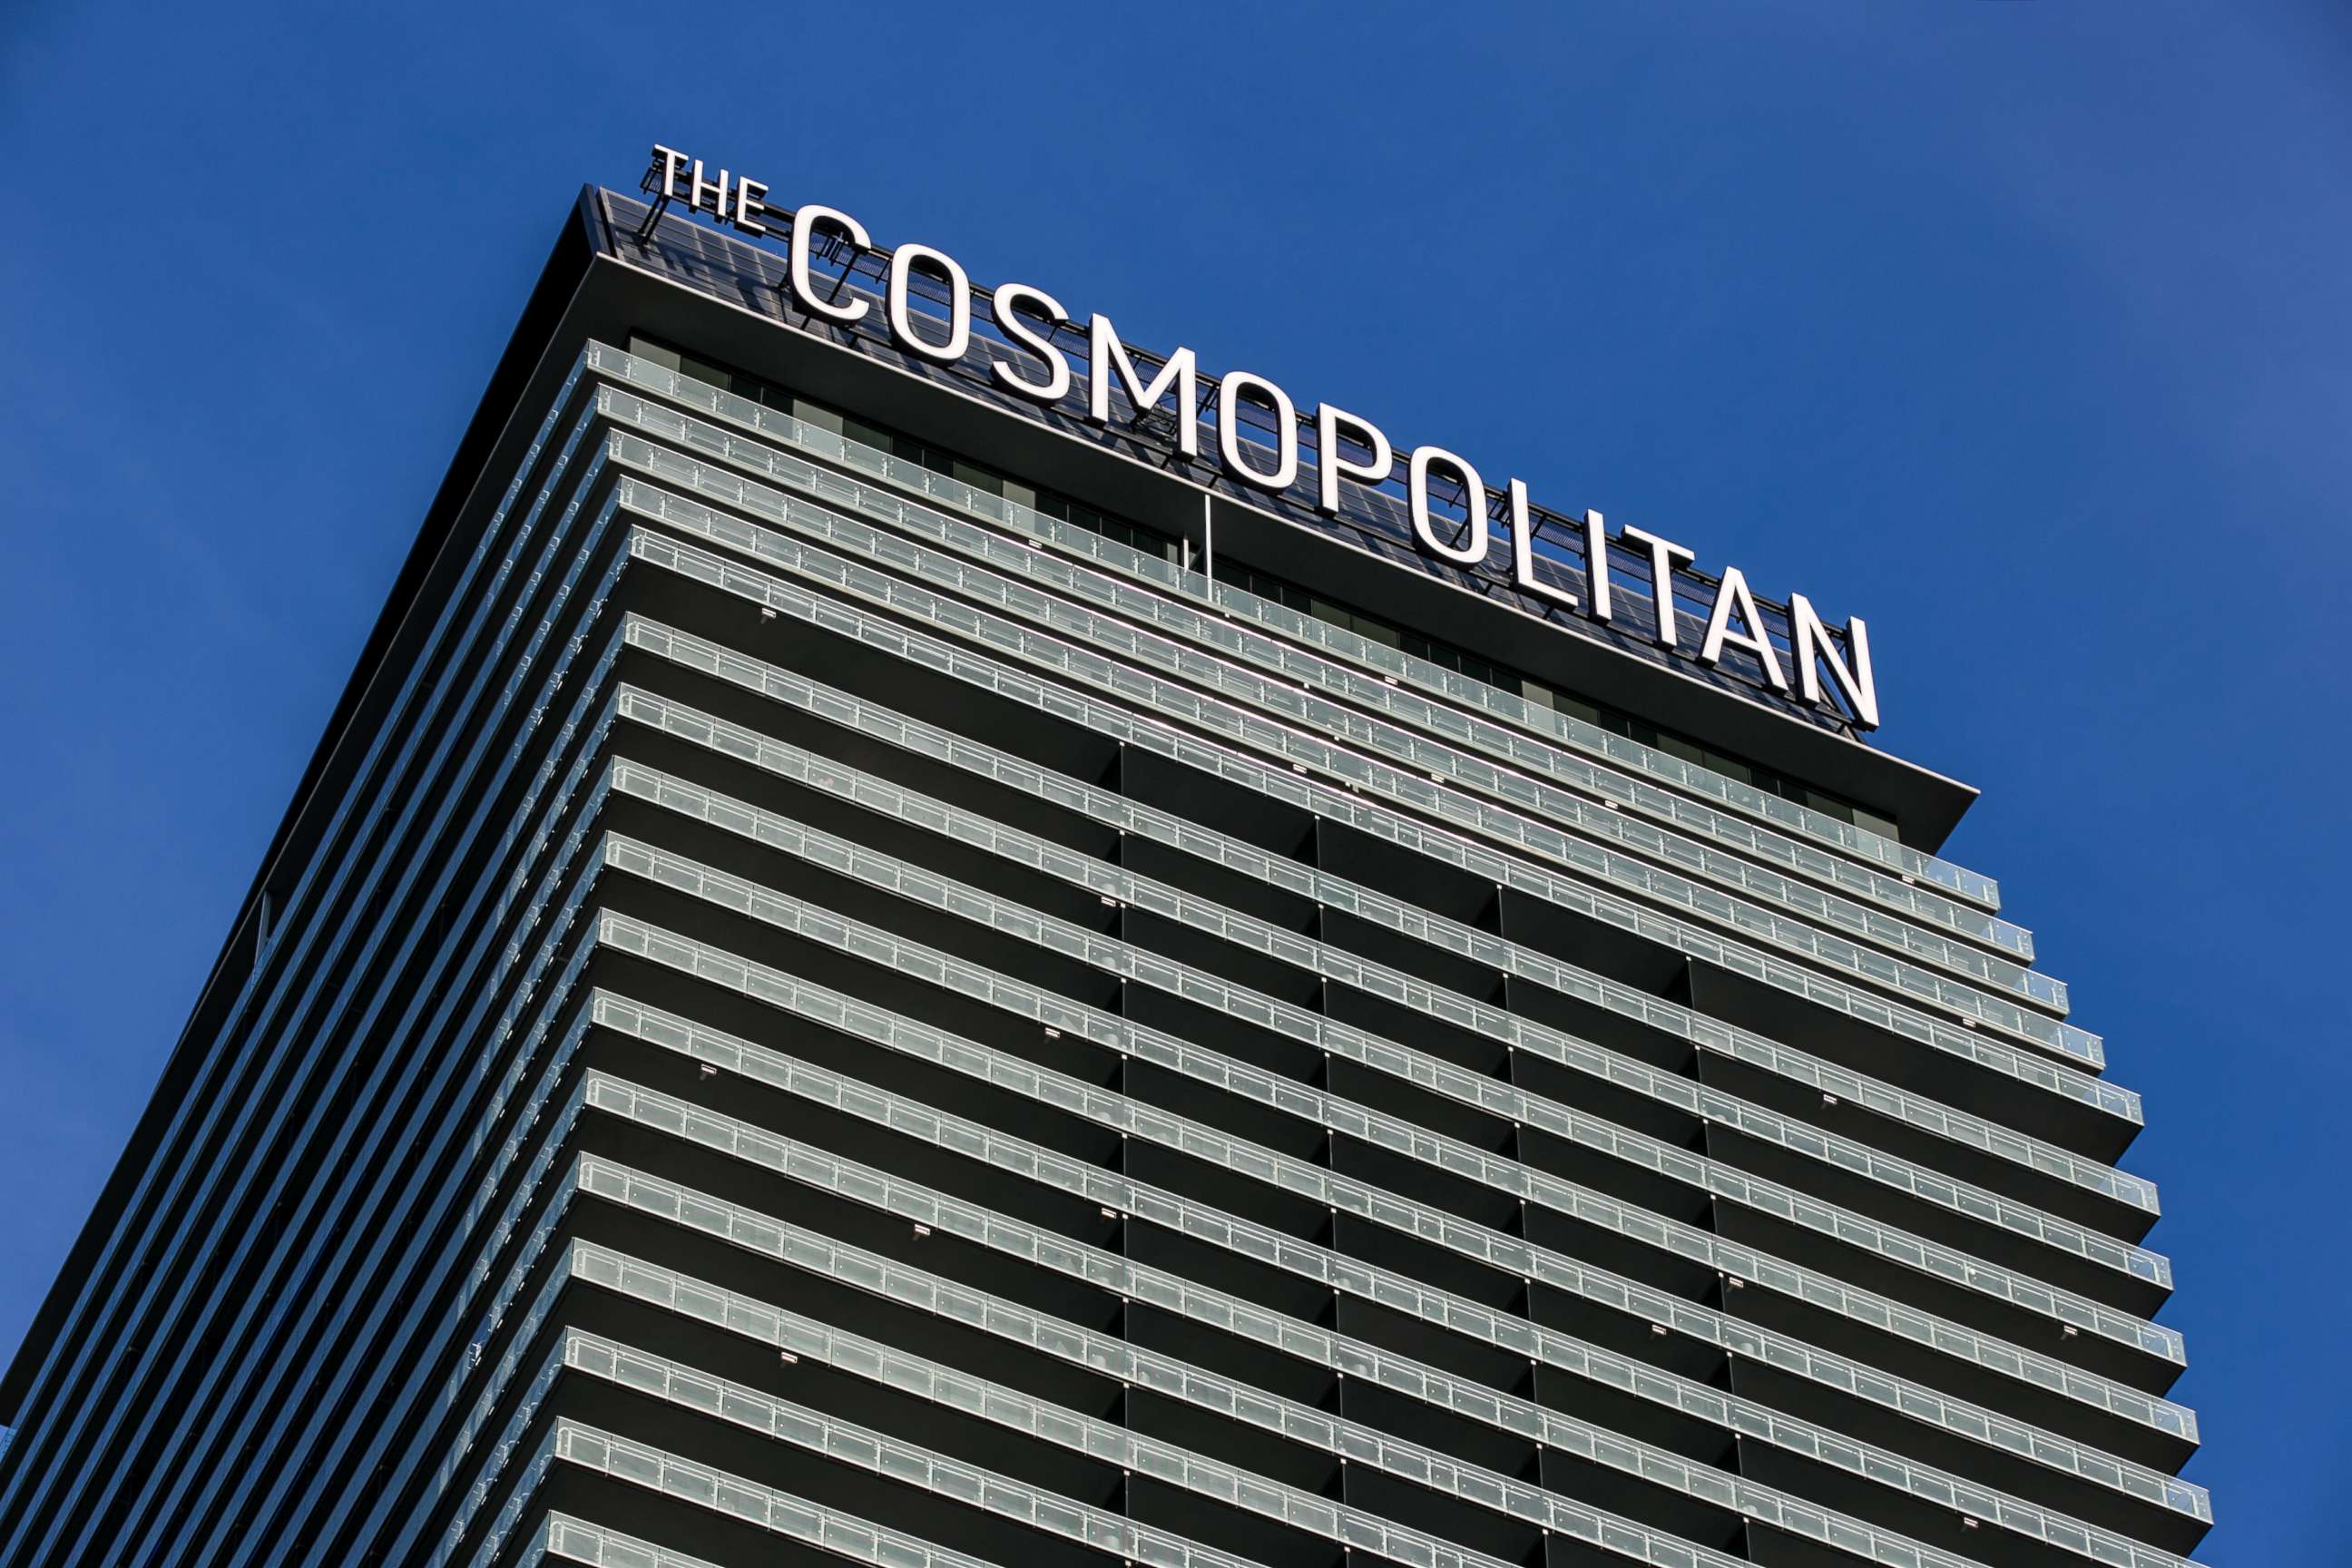 PHOTO: The exterior of the Cosmopolitan Hotel & Casino is viewed on May 31, 2017 in Las Vegas.